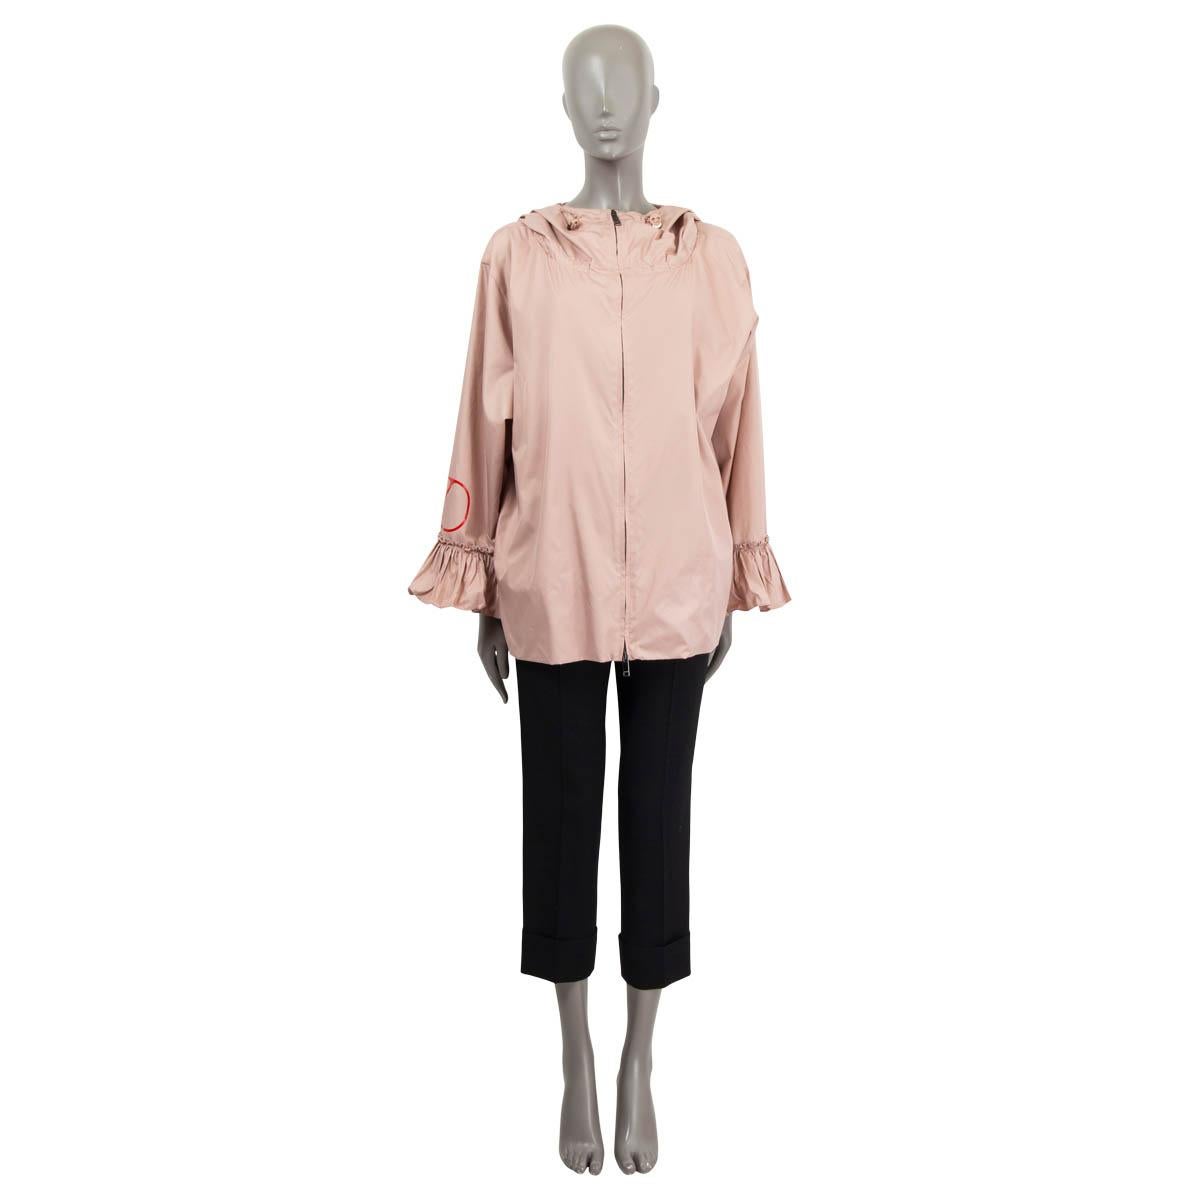 100% authentic Valentino hooded rain jacket in dusty rose polyester (100%). Features the V logo at one sleeve, two side slit pockets and gathered cuffs. Has a drawstring closure at the neck and the hips. Opens with a zipper on the front. Unllined.